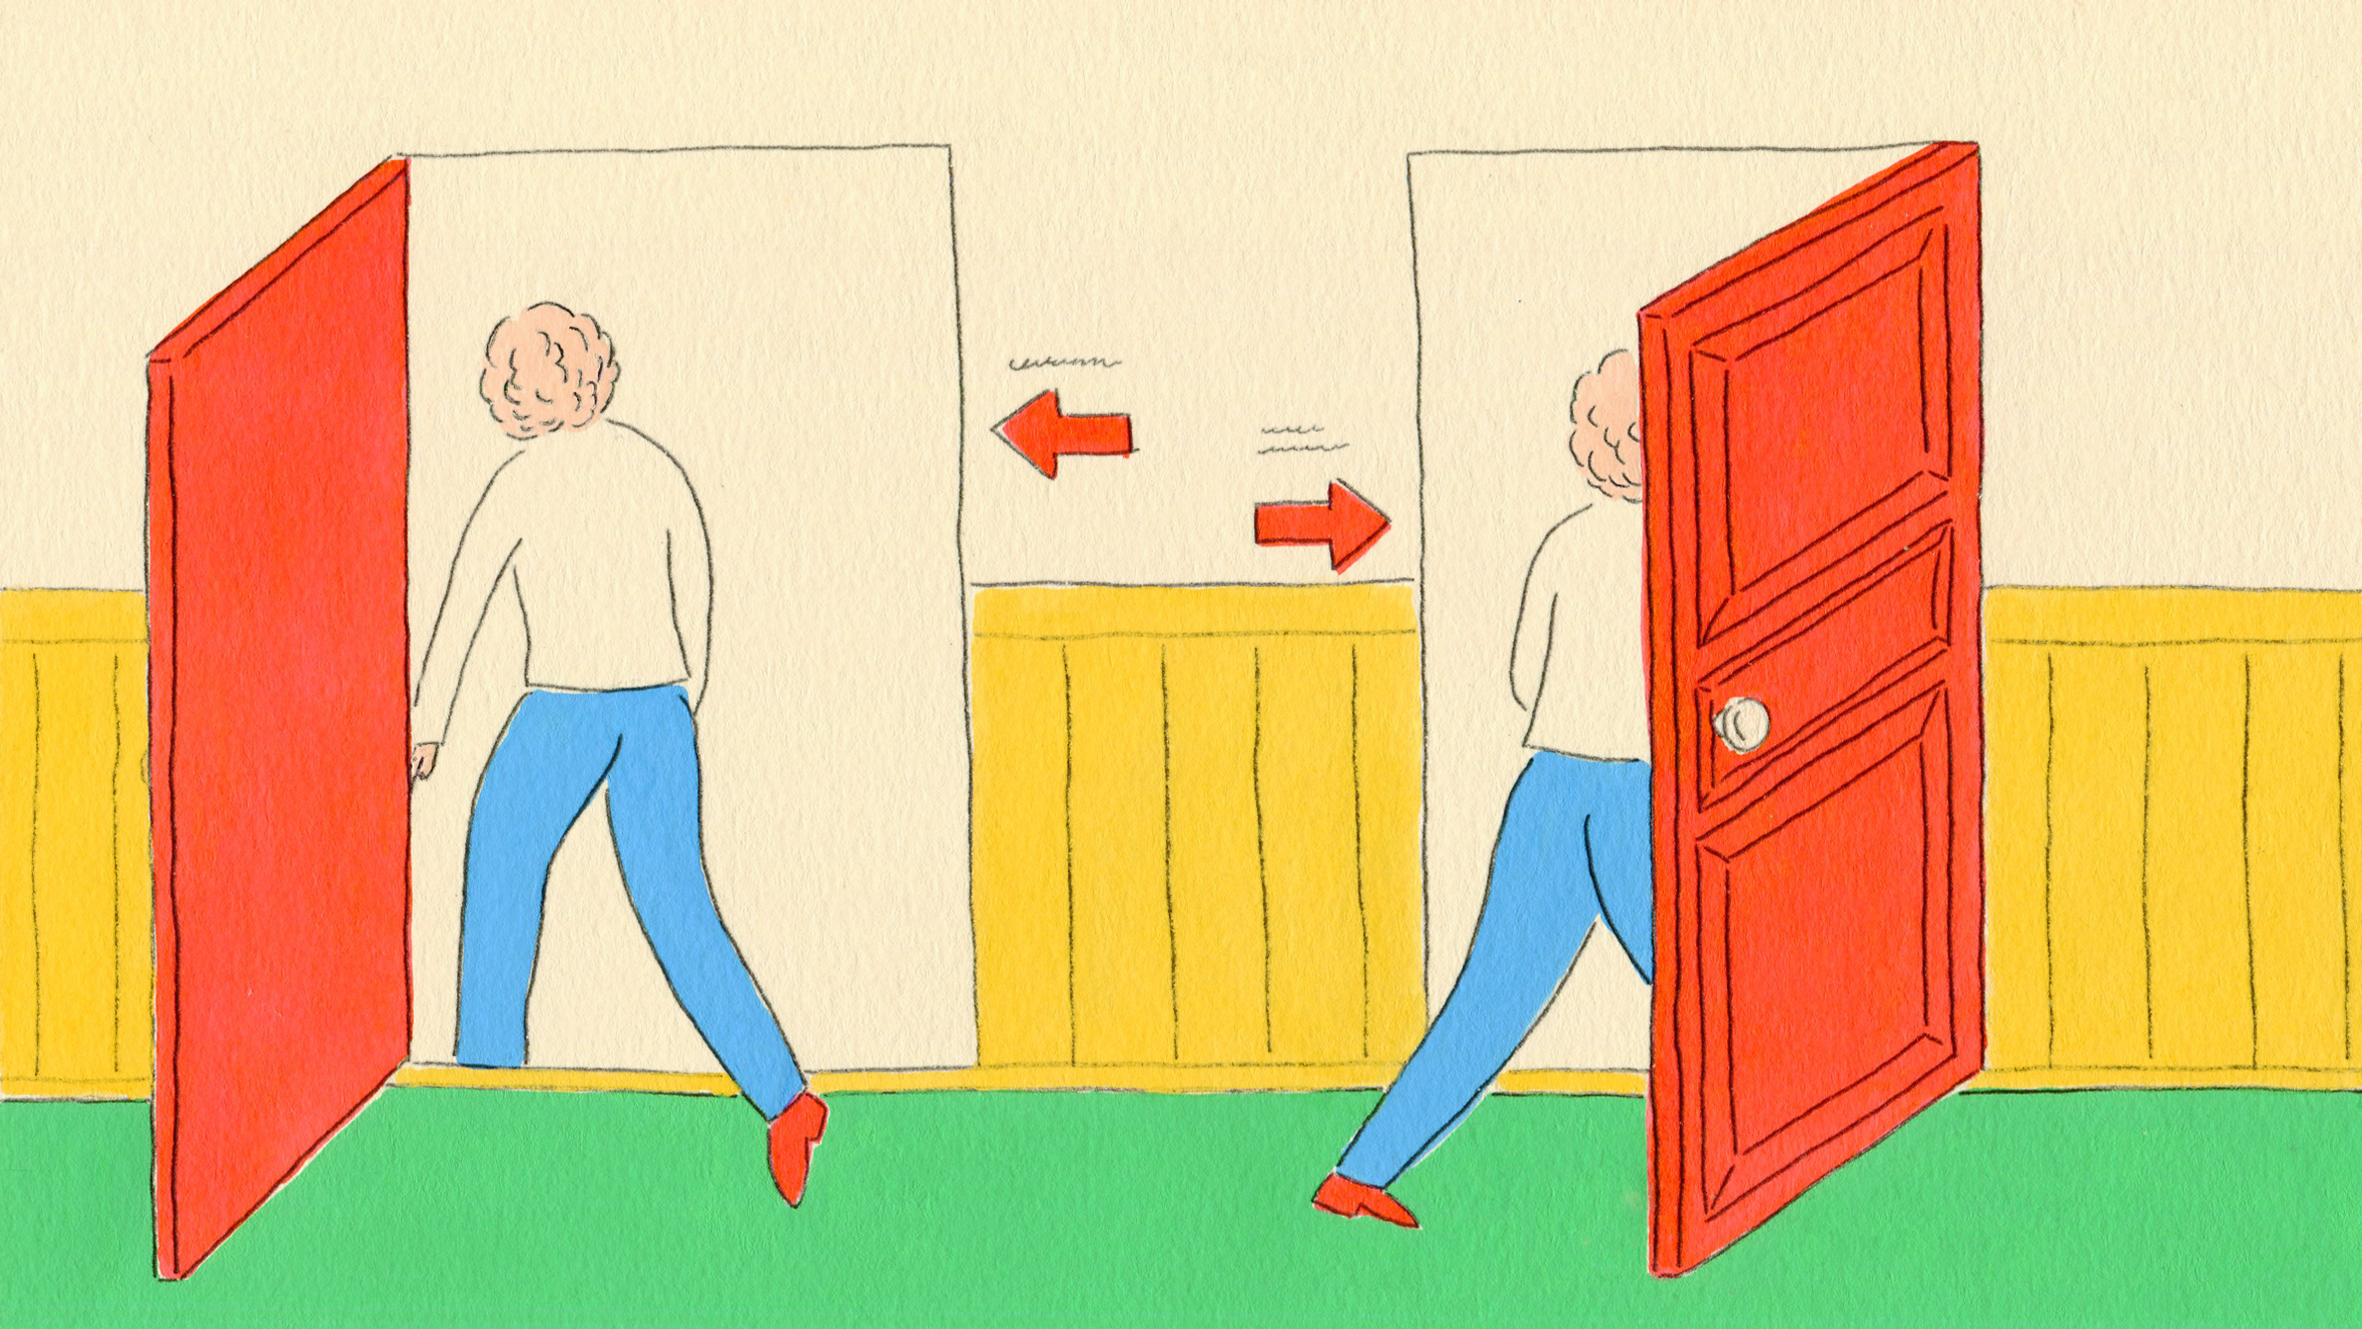 An illustration in bright colors shows two identical people in blue pants and white shirts, walking through two different red doors with arrows next to them. The left door opens to the left, and the right door opens to the right. 